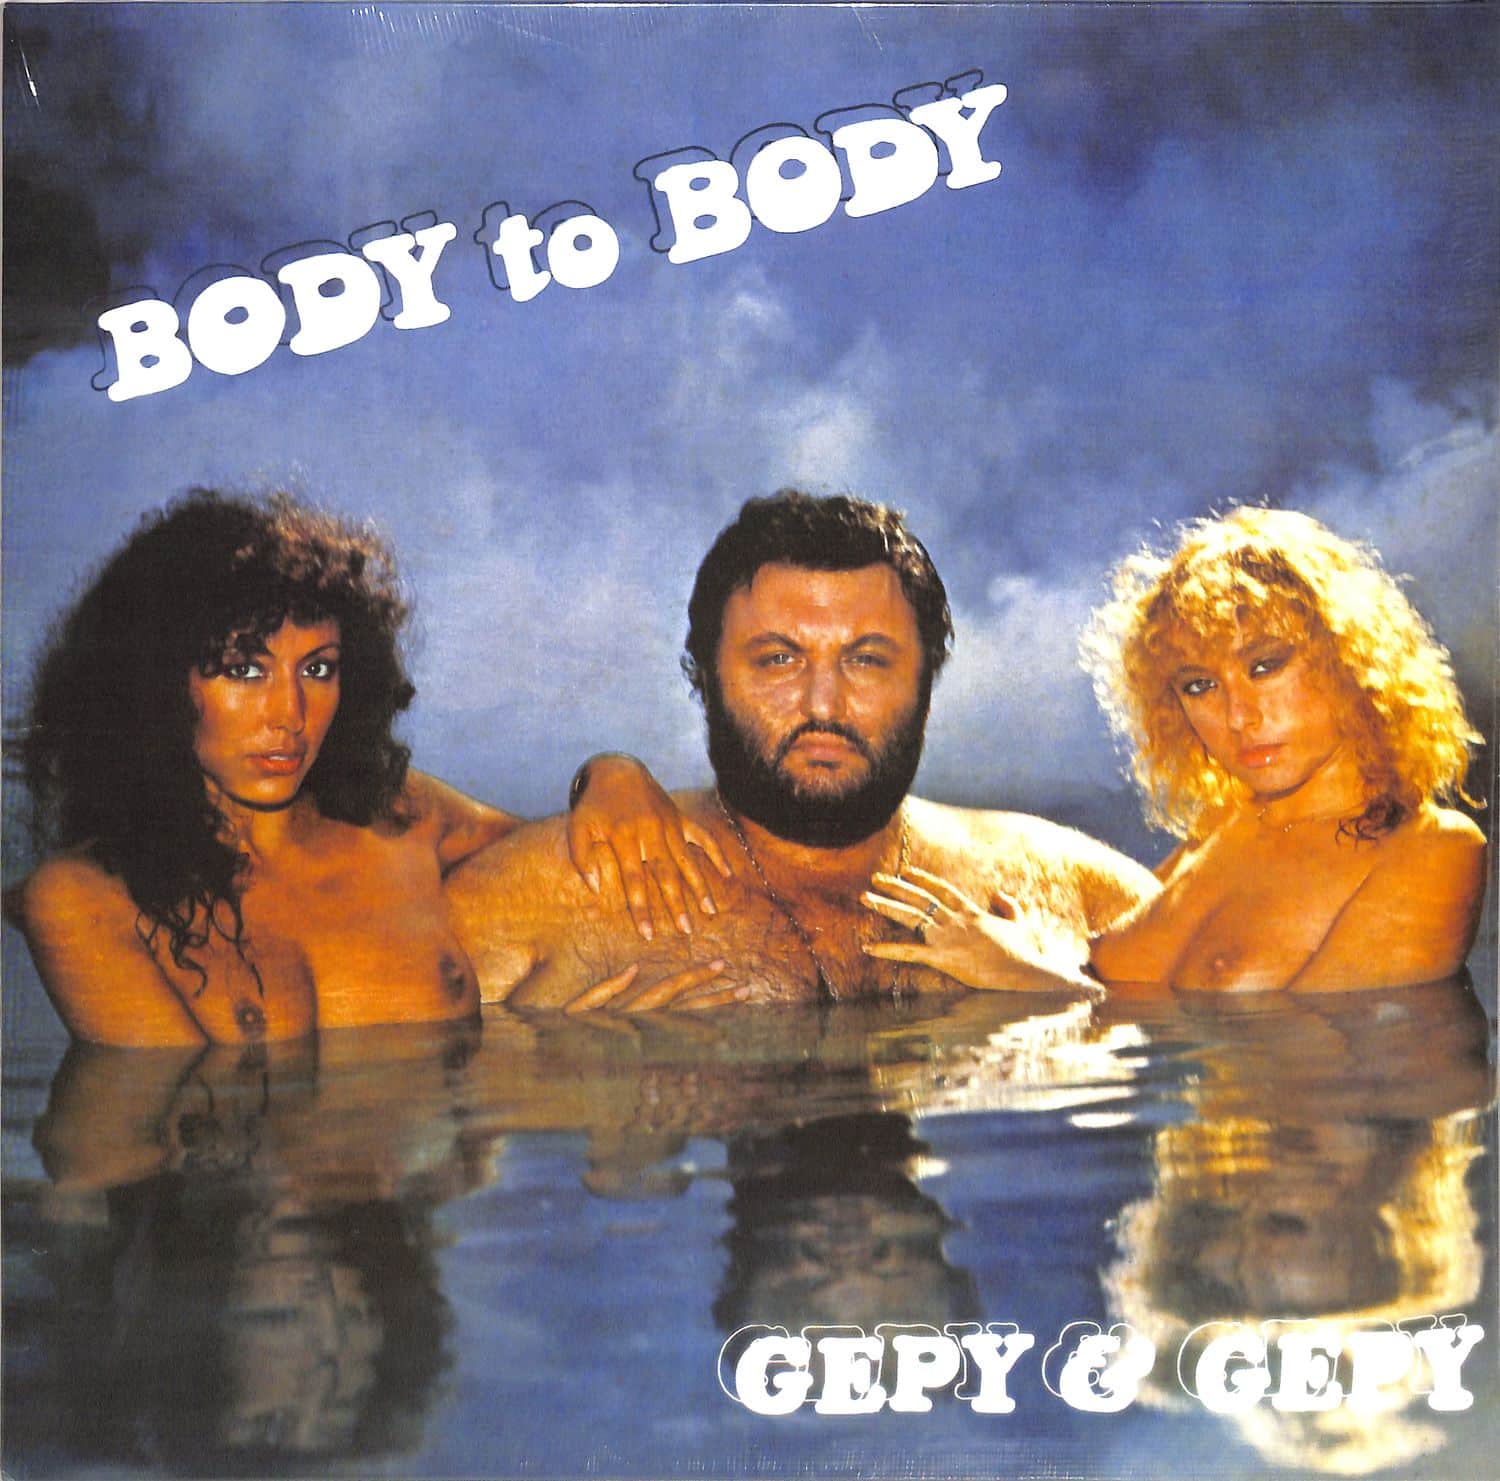 Gepy And Gepy - BODY TO BODY